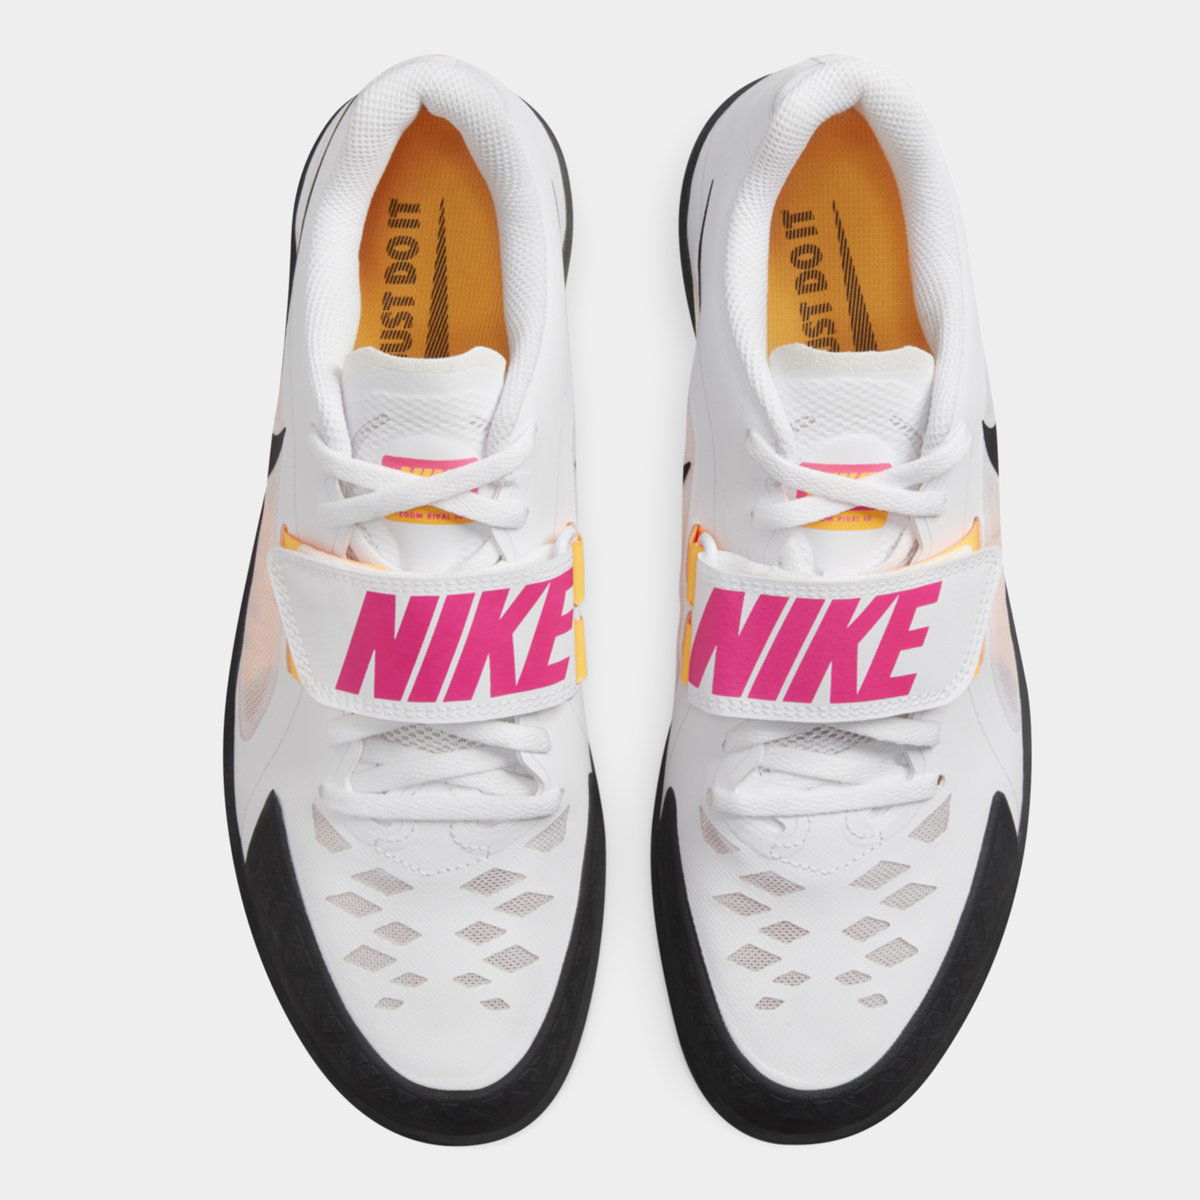 Nike Zoom SD 4 Track And Field Throwing Shoes White/Black, £44.00